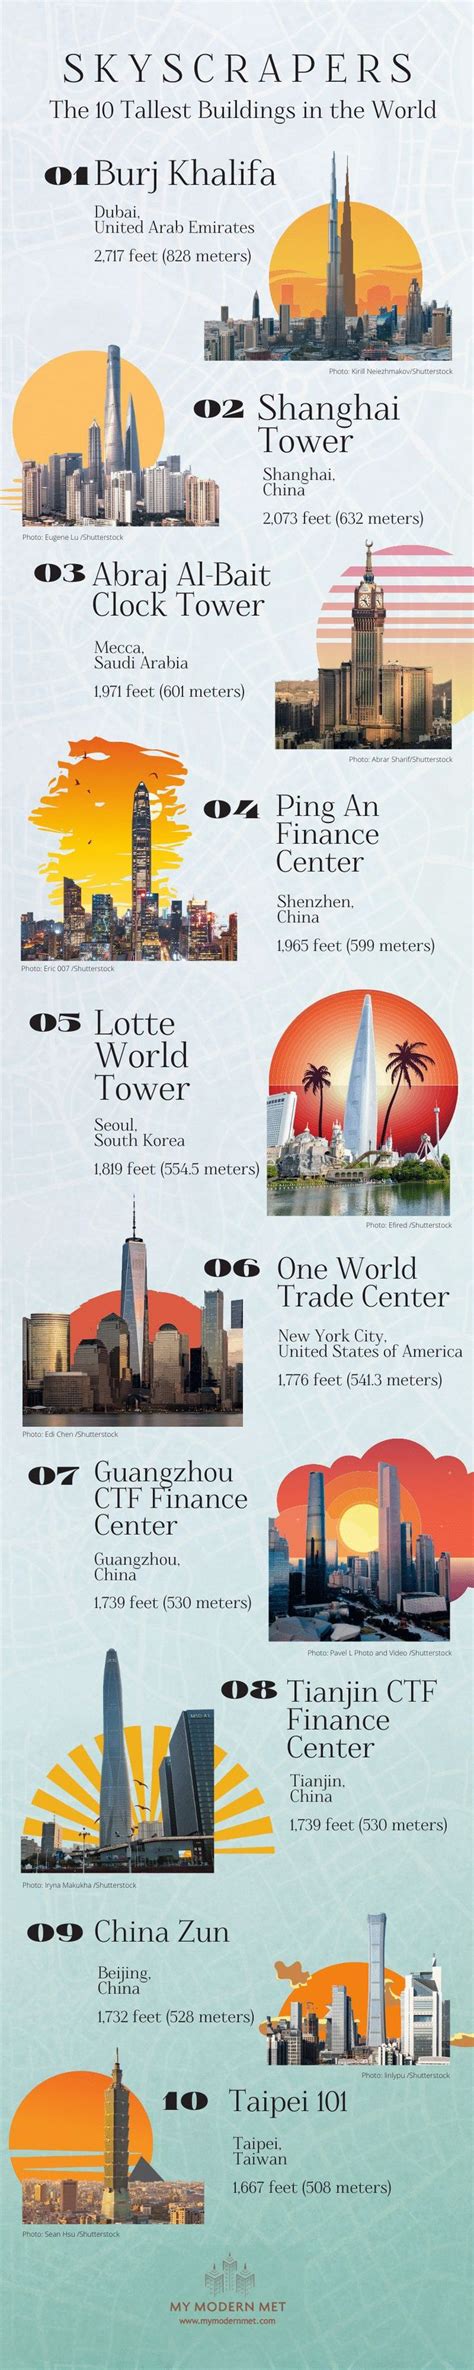 10 Skyscrapers That Are The Tallest Buildings In The World Infographic